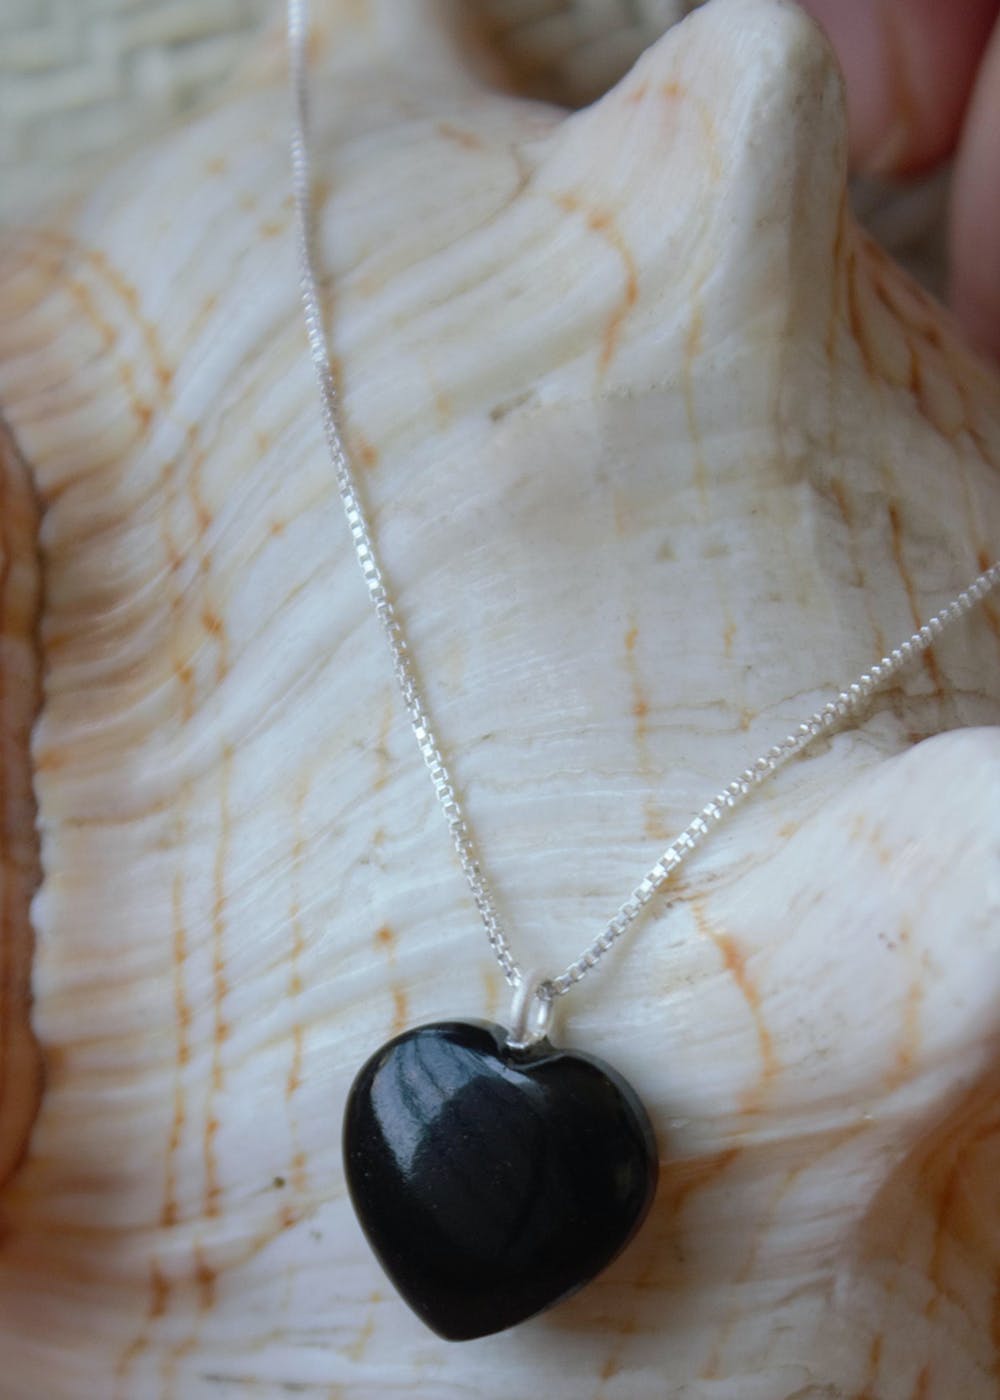 BLACK HEART PENDANT NECKLACE W/ 1 CT LAB ACCENTS & ONYX 925 STERLING SILVER